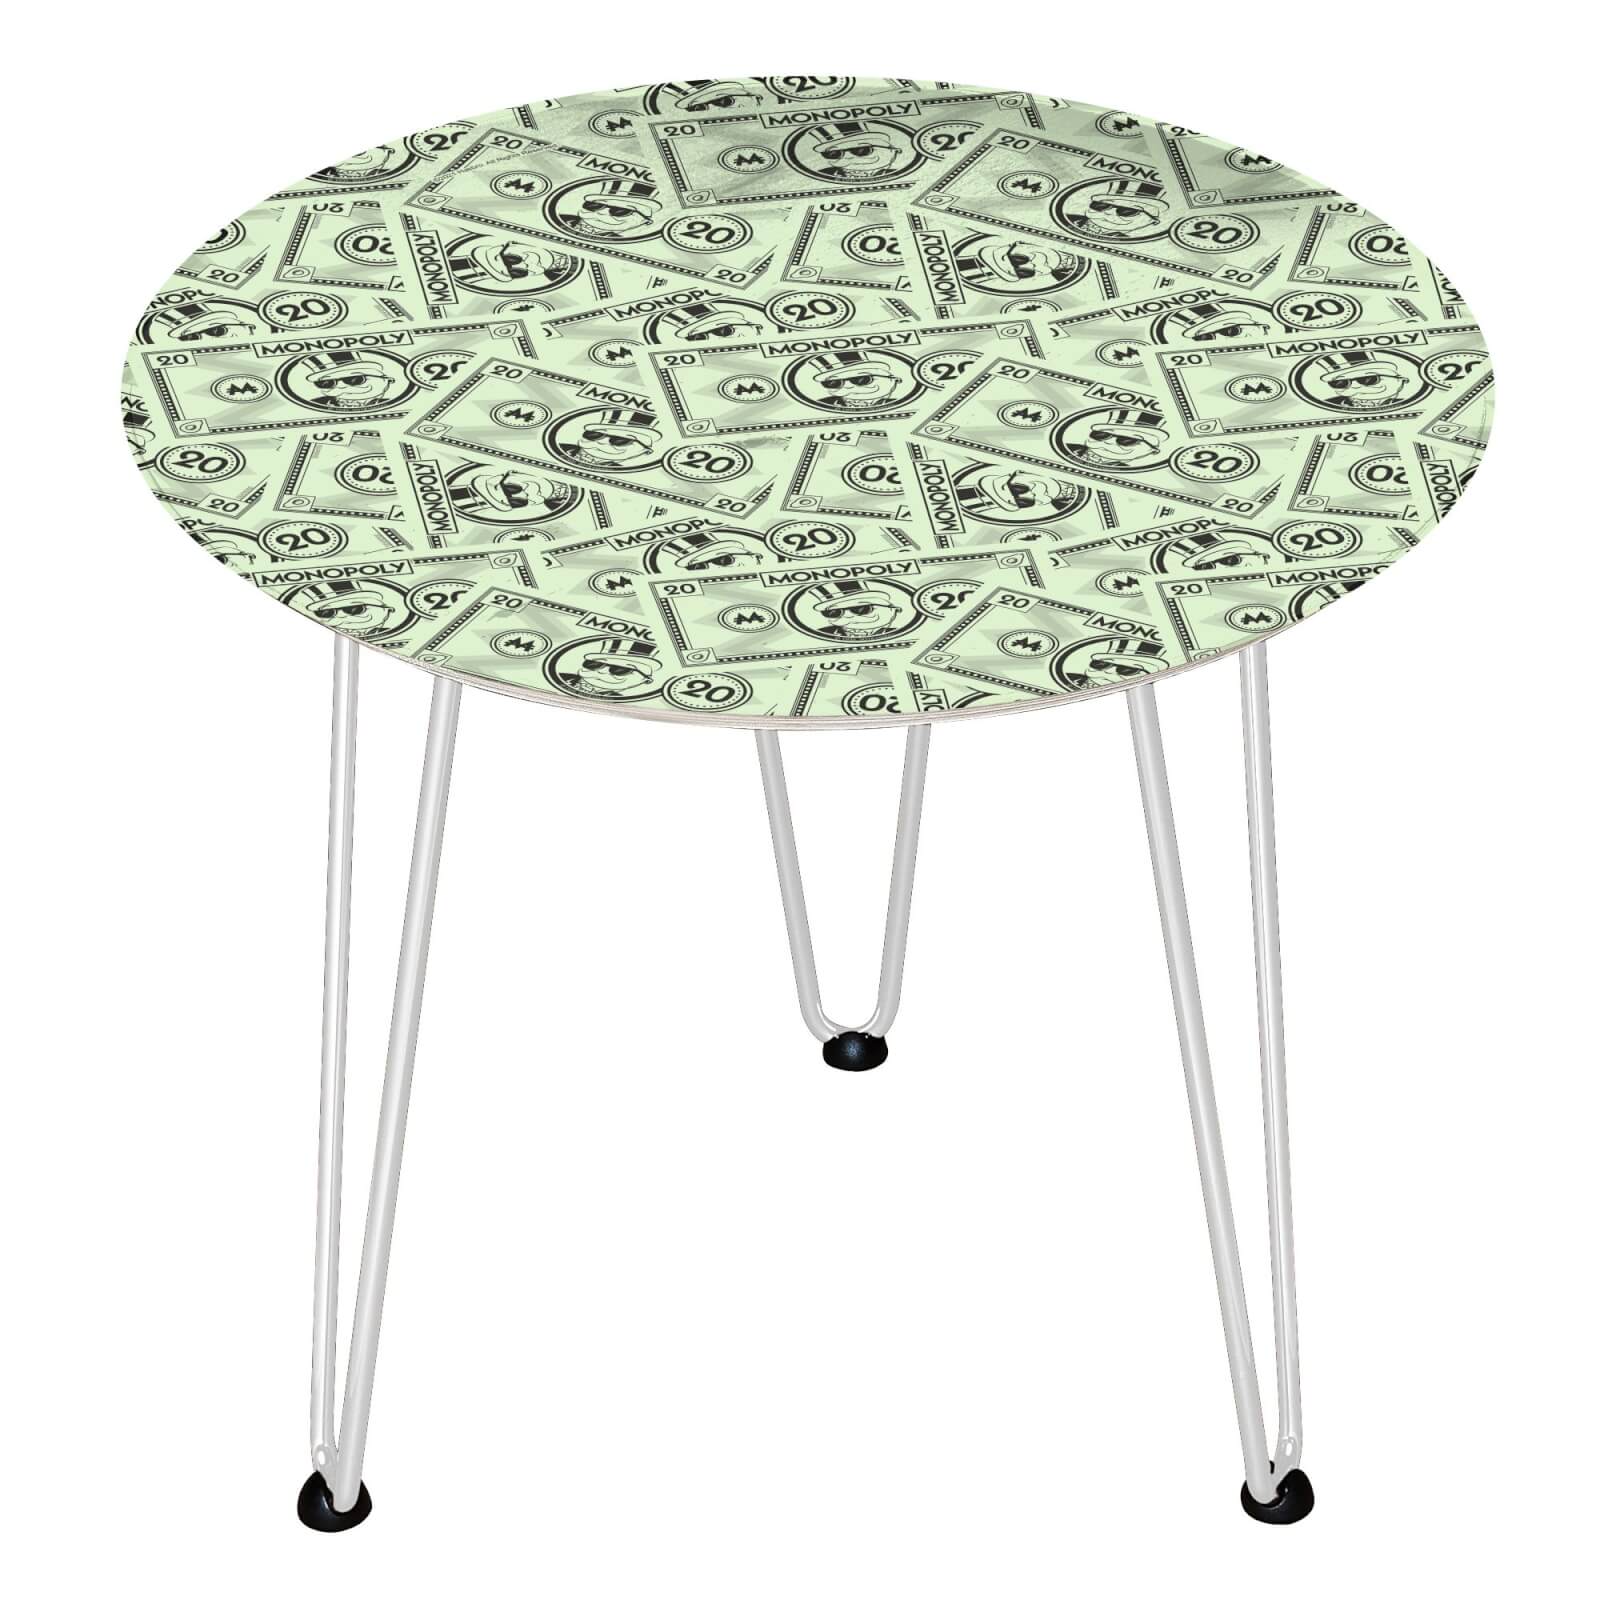 Decorsome Monopoly Money 20 Wooden Side Table - White